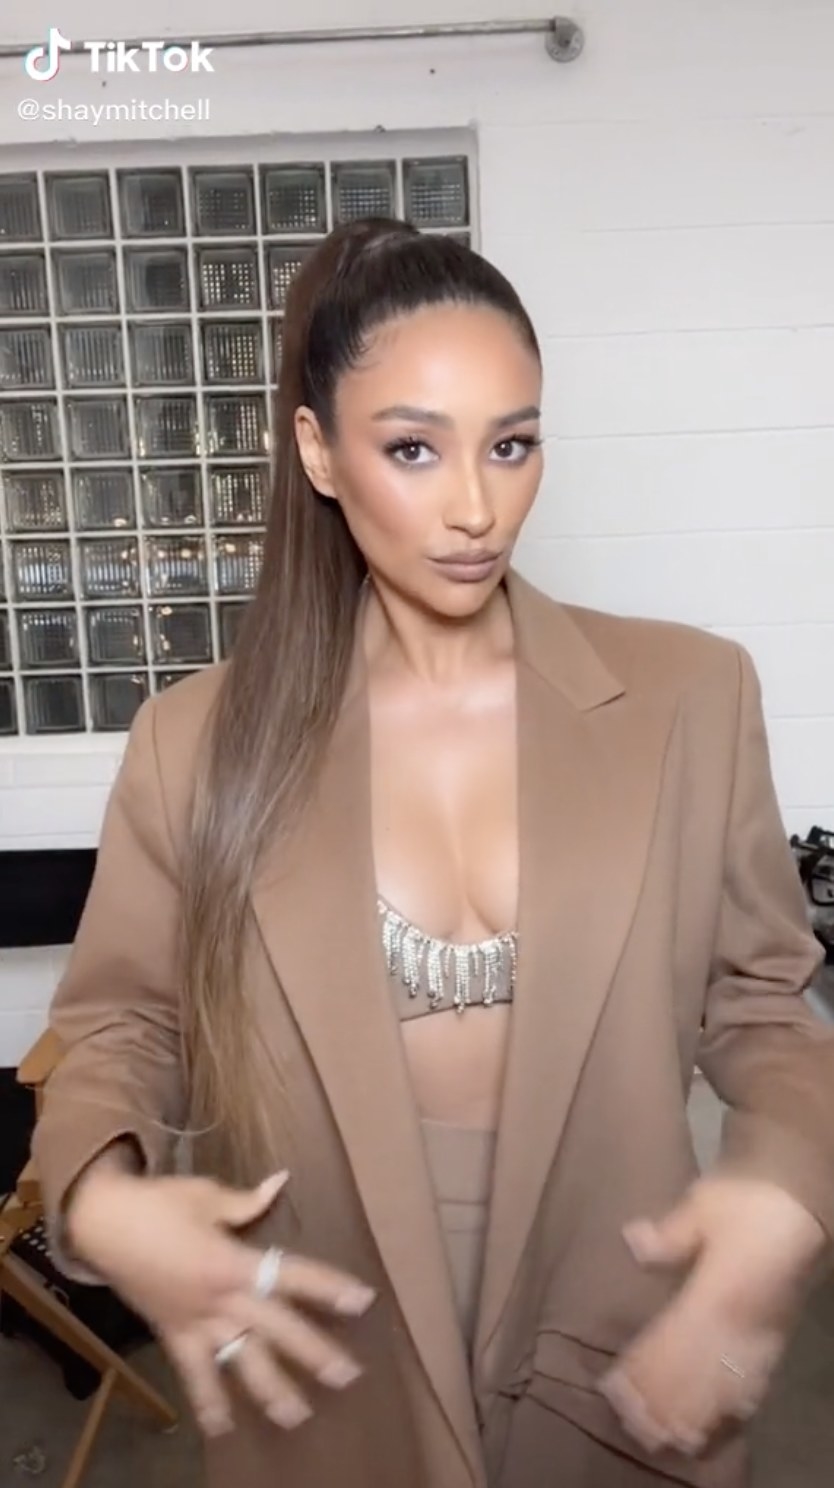 Shay looks at the camera straight on while wearing a blazer to cover her bump